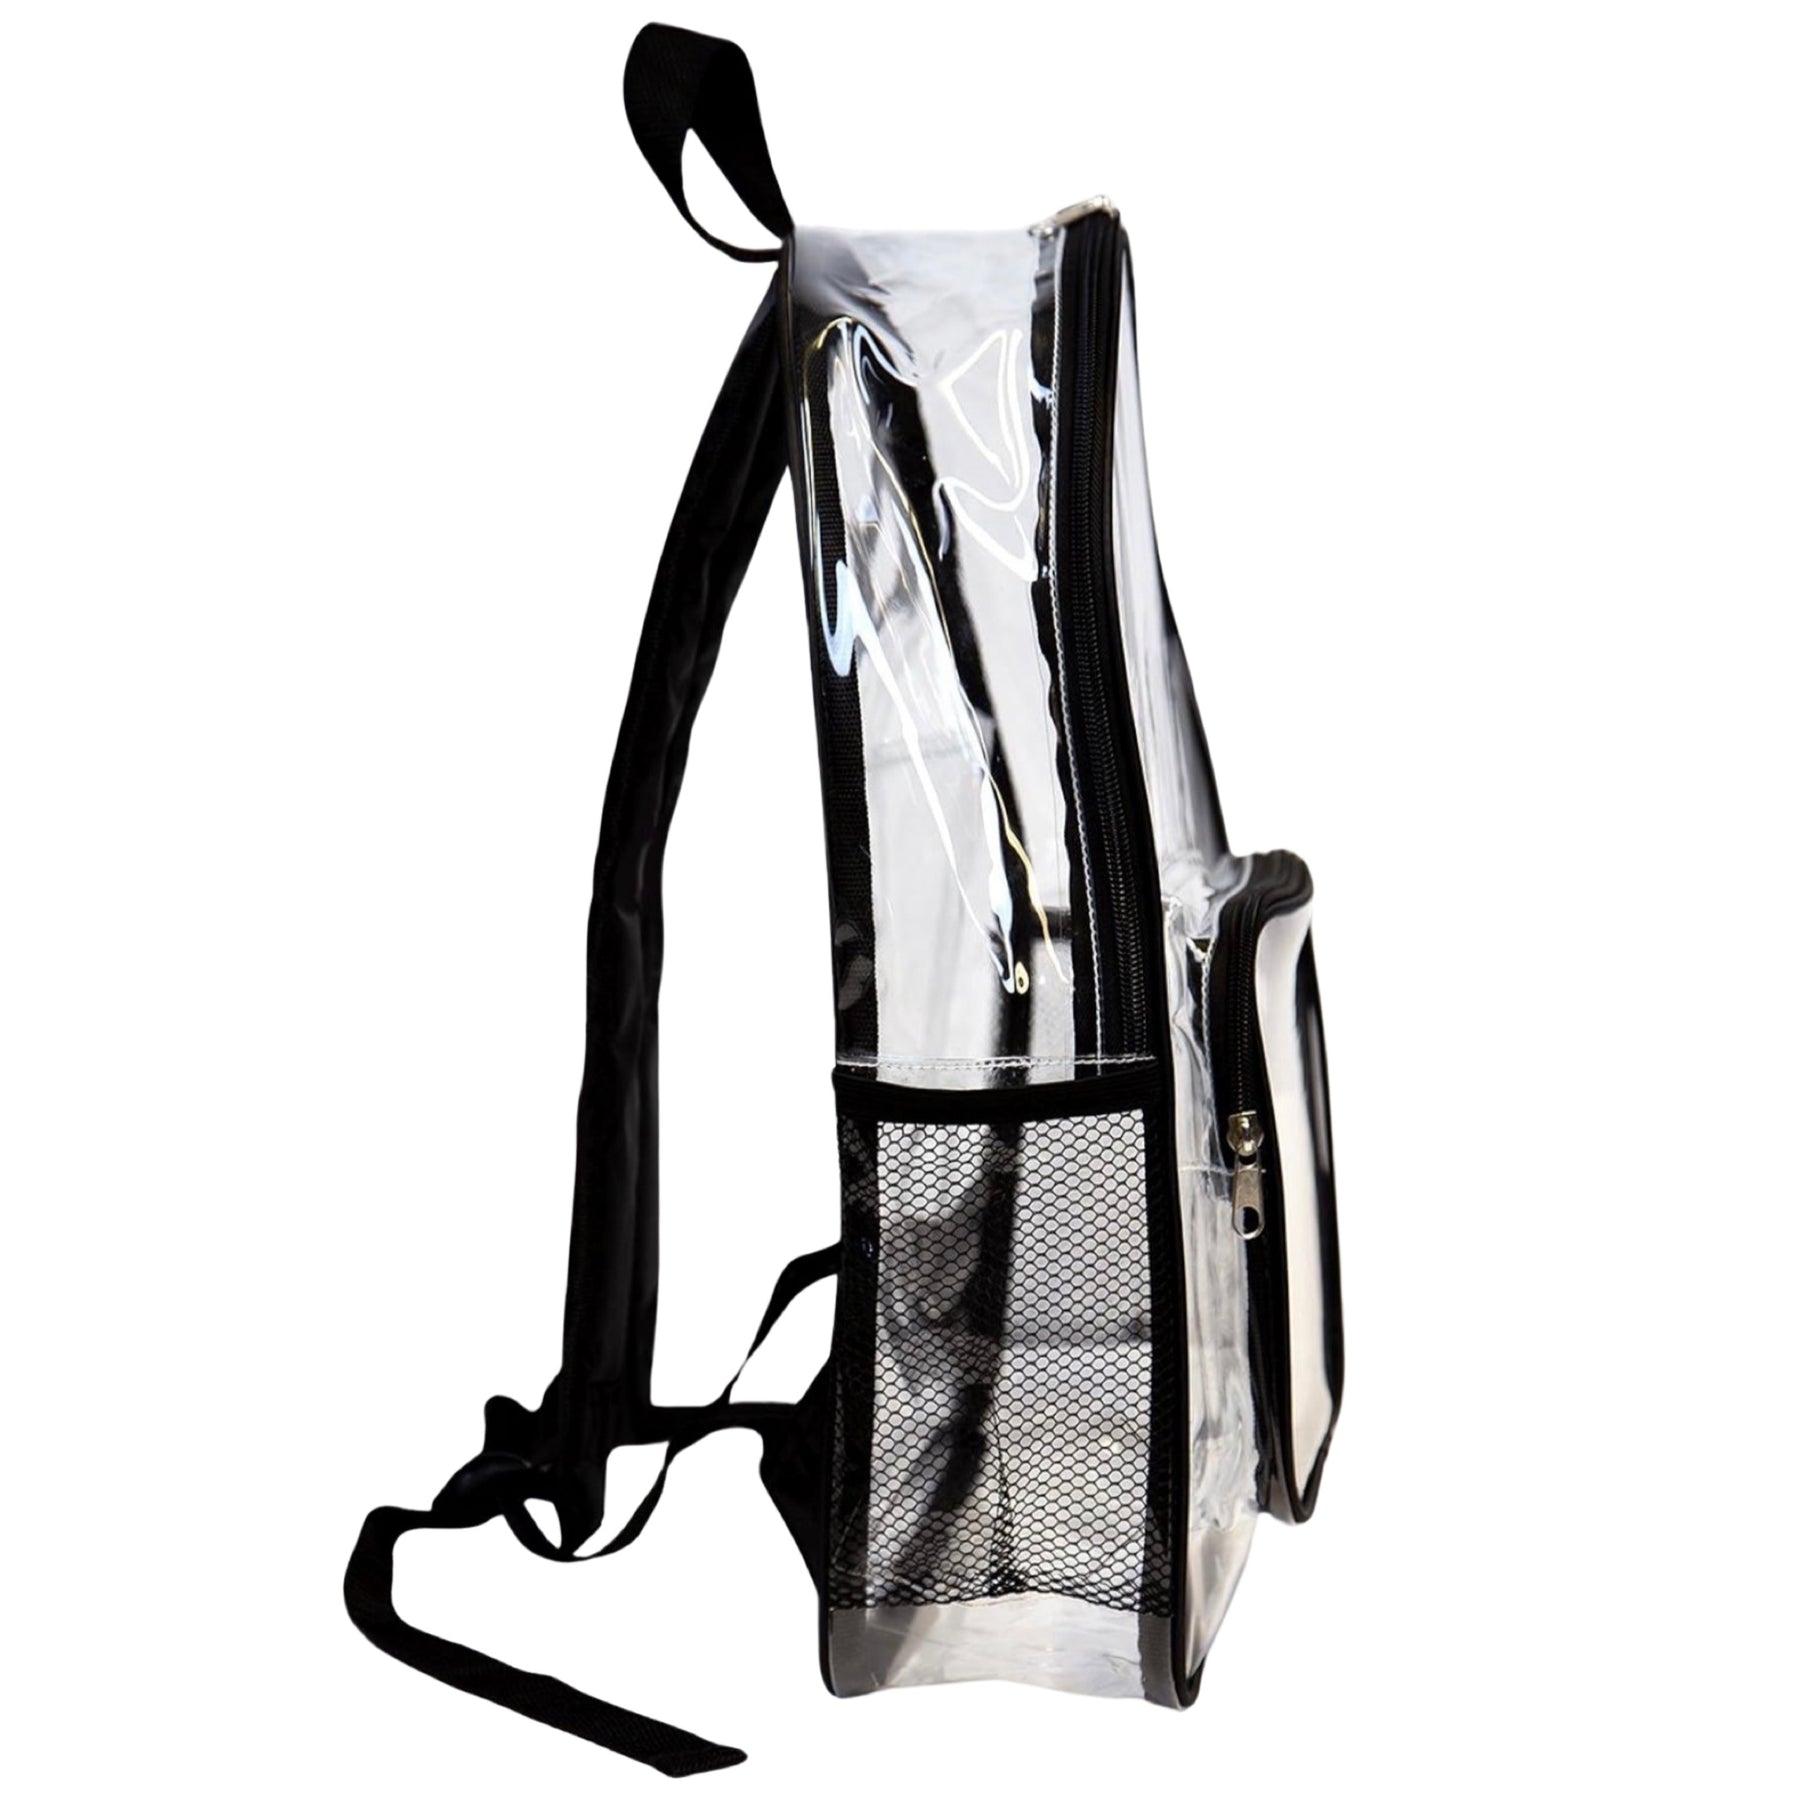 Transparent Clear Backpack - Concert & Stadium Approved